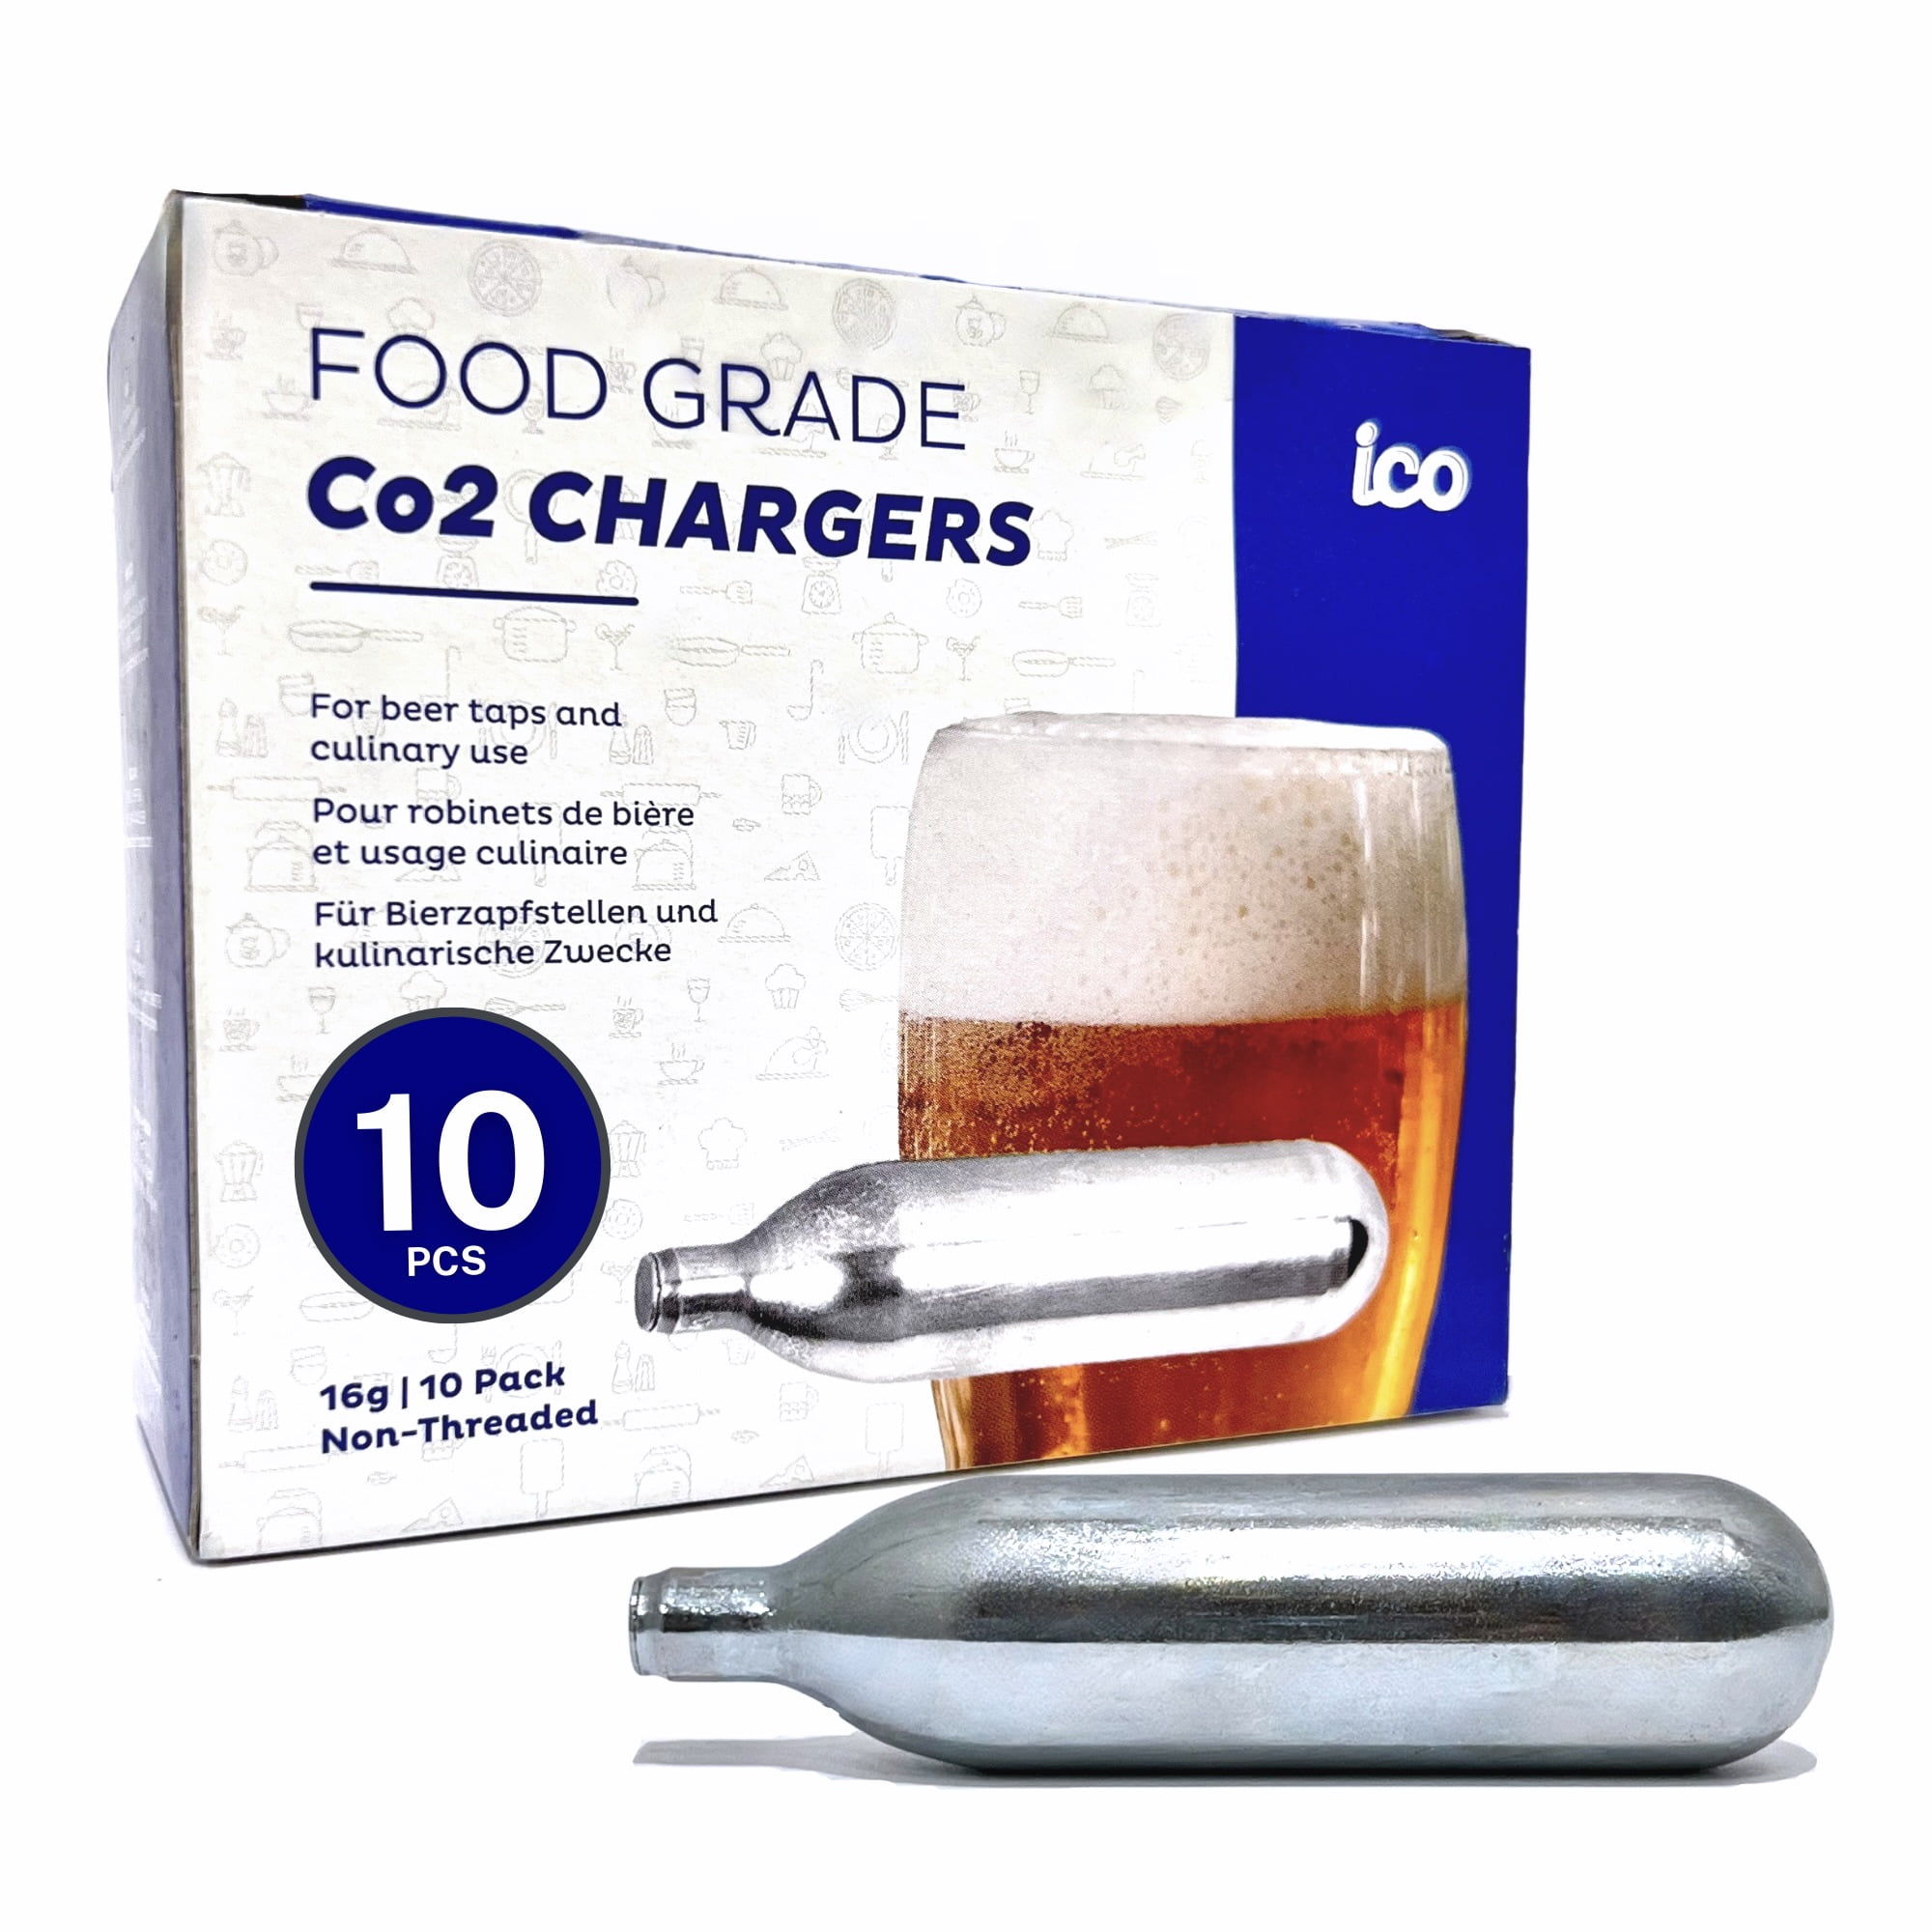 Food Grade CO2 Cartridges For A Healthy Beverage Experience!